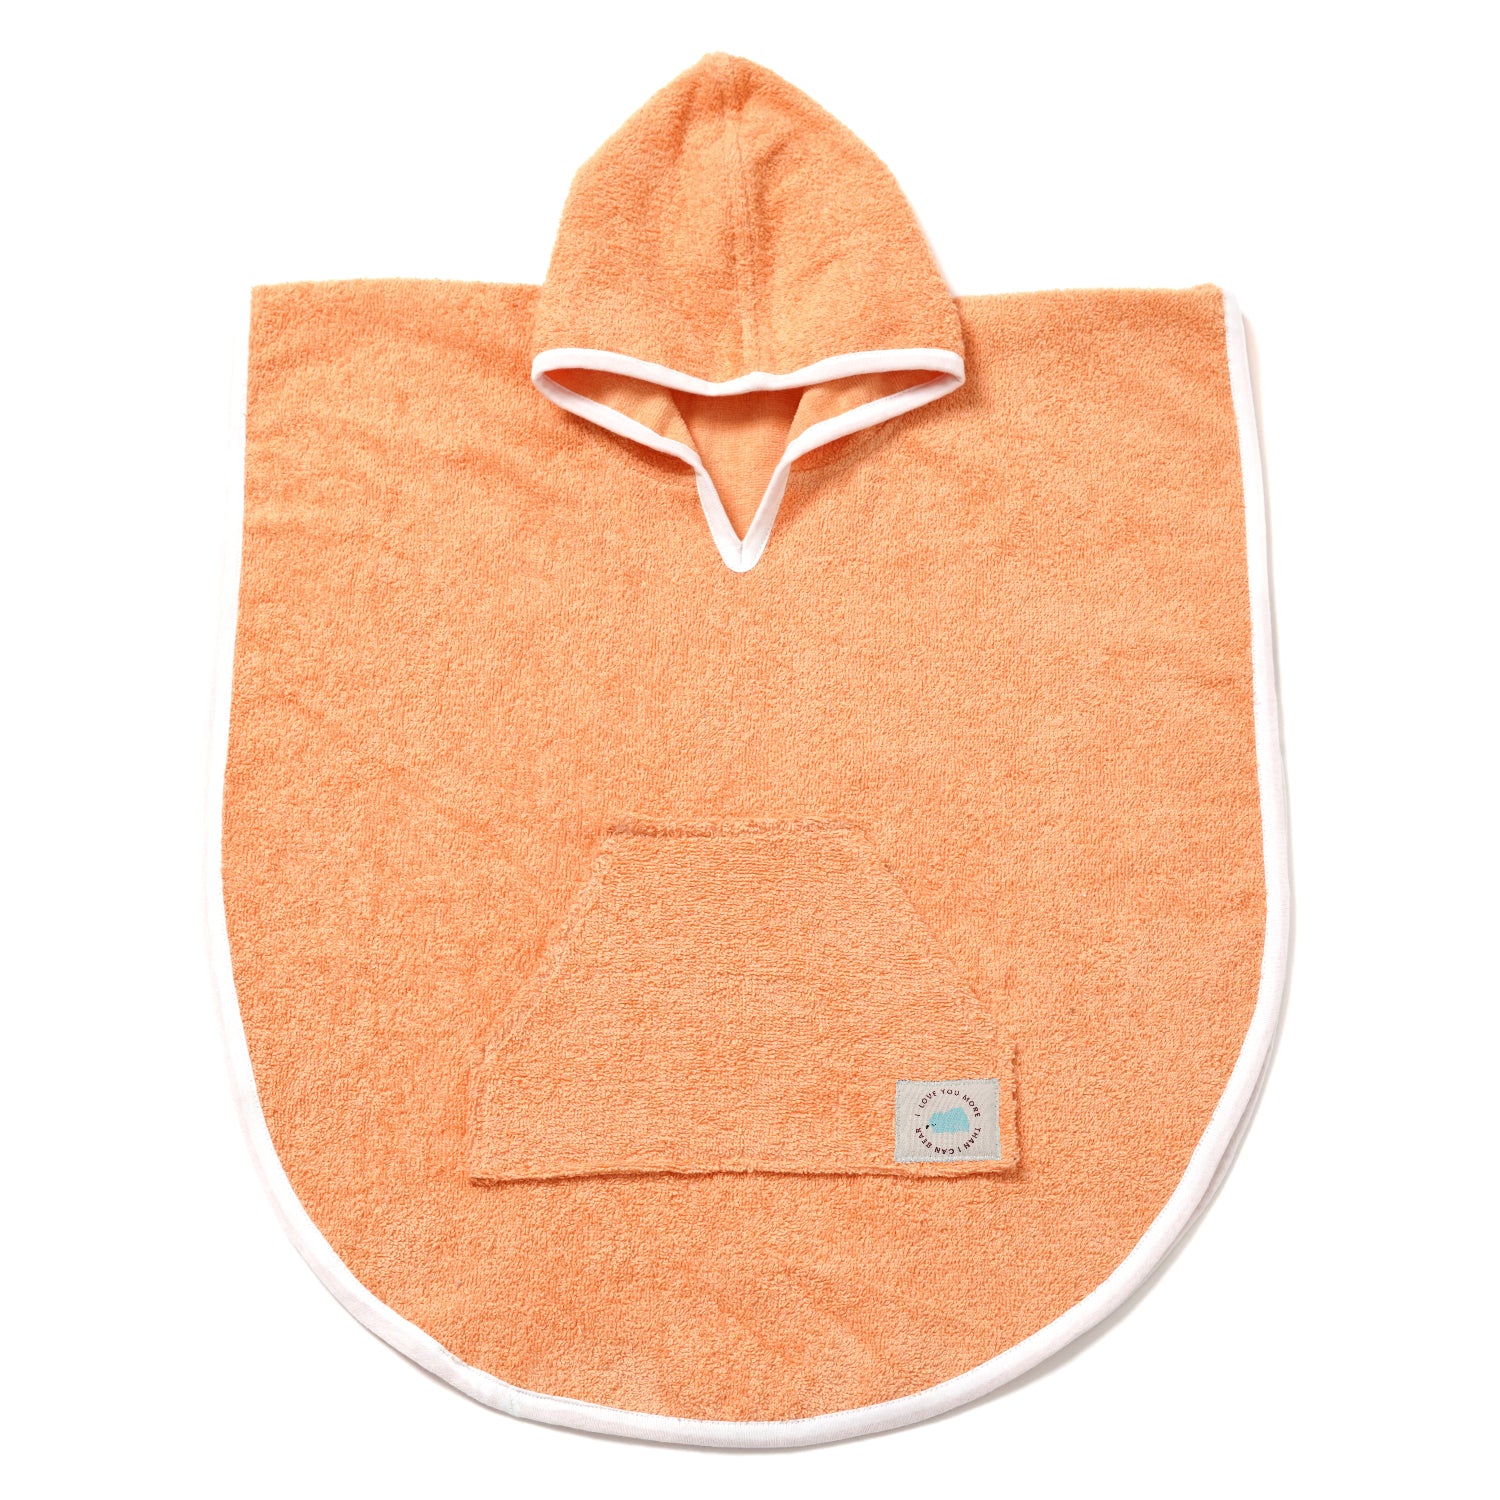 100% Cotton Woven Baby Poncho Towel Soft and Absorbent Hooded Towel (Orange)